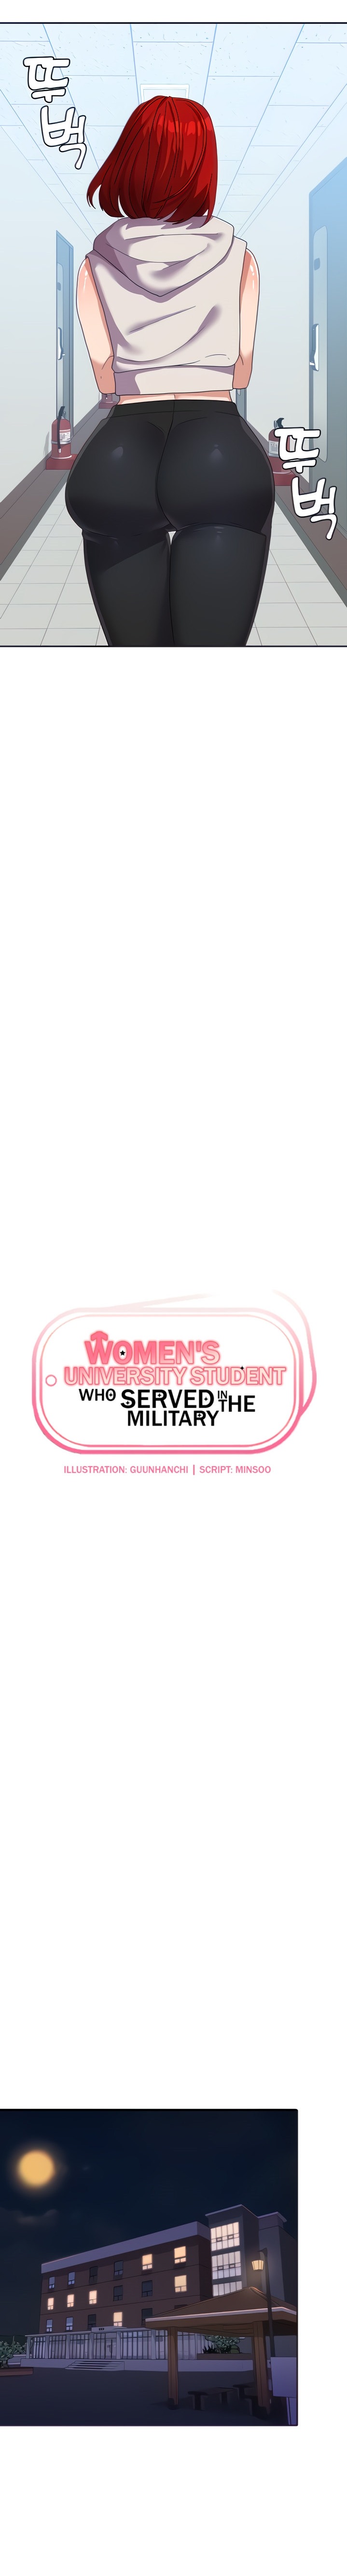 Women’s University Student who Served in the Military - Chapter 11 Page 3